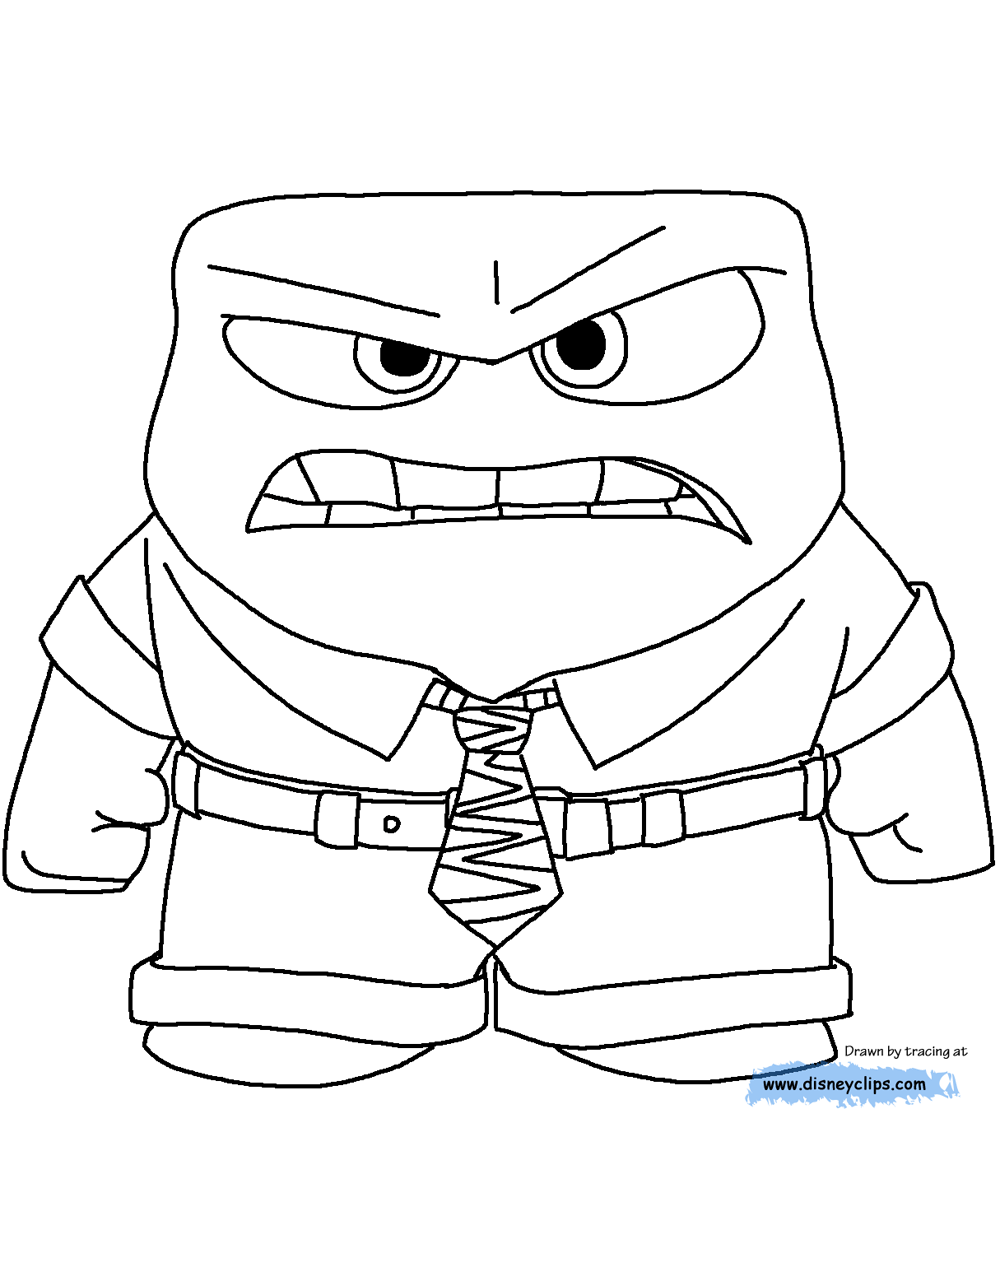 Inside Out Coloring Pages   Disneyclips.com